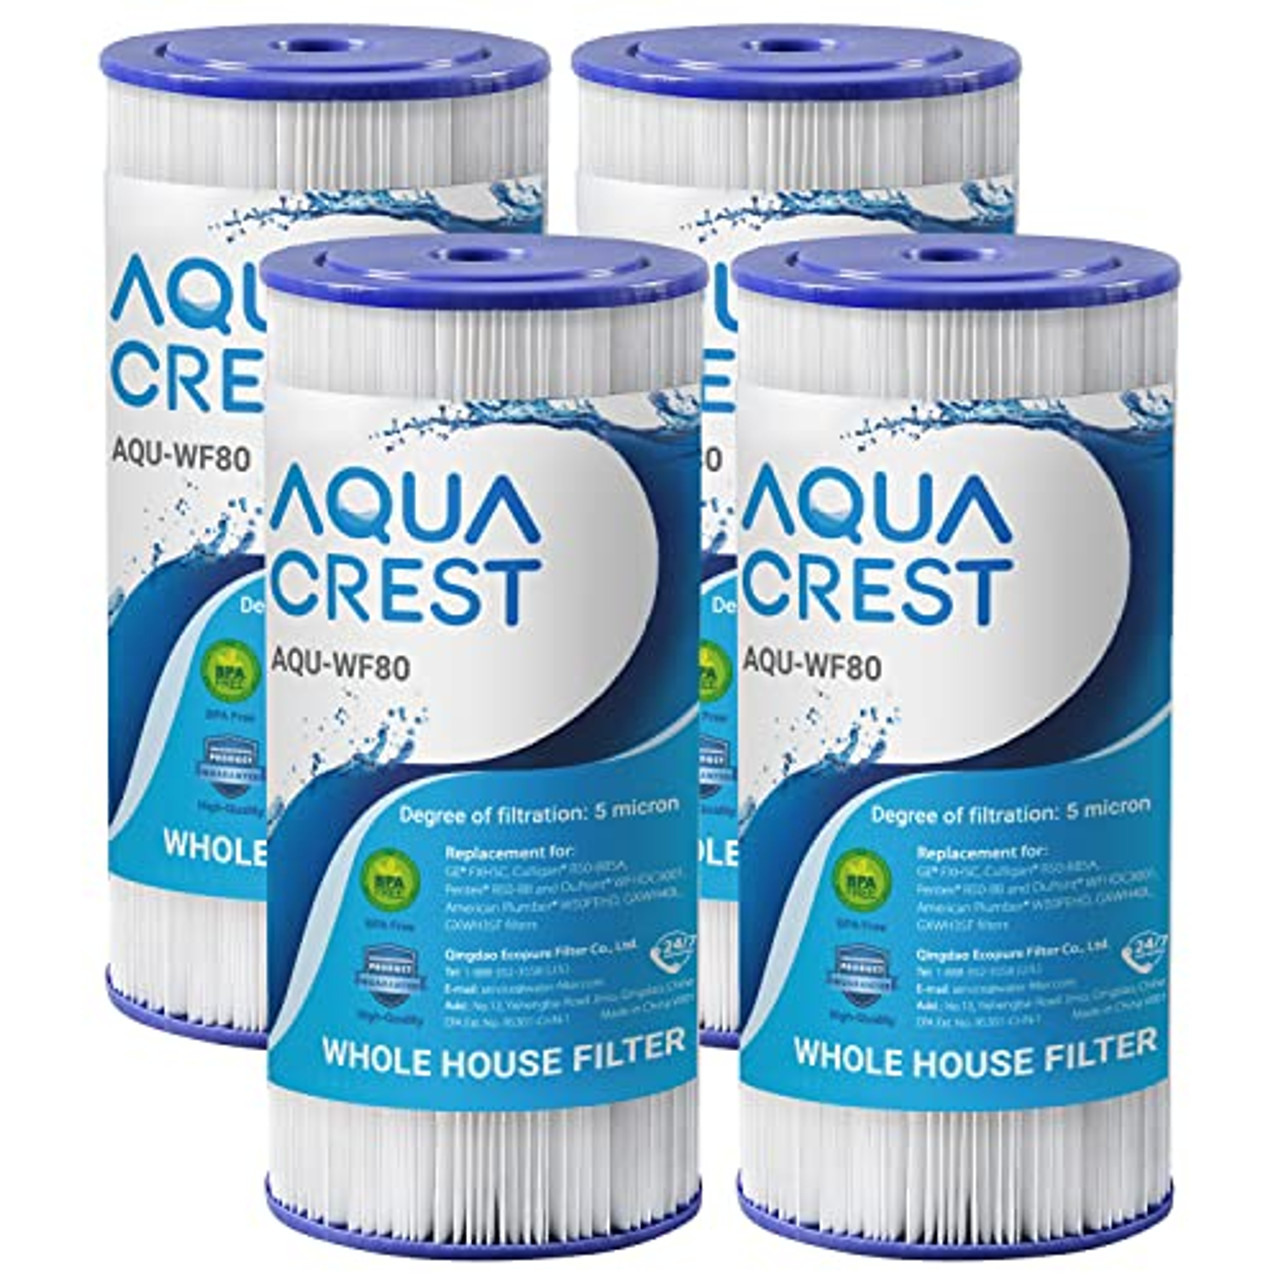 AQUACREST FXHSC Whole House Water Filter, Replacement for GE FXHSC,  GXWH40L, GXWH35F, American Plumber W50PEHD, W10-PR, Culligan R50-BBSA, 5  Micron, 10 x 4.5, High Flow Sediment Filters, Pack of 4